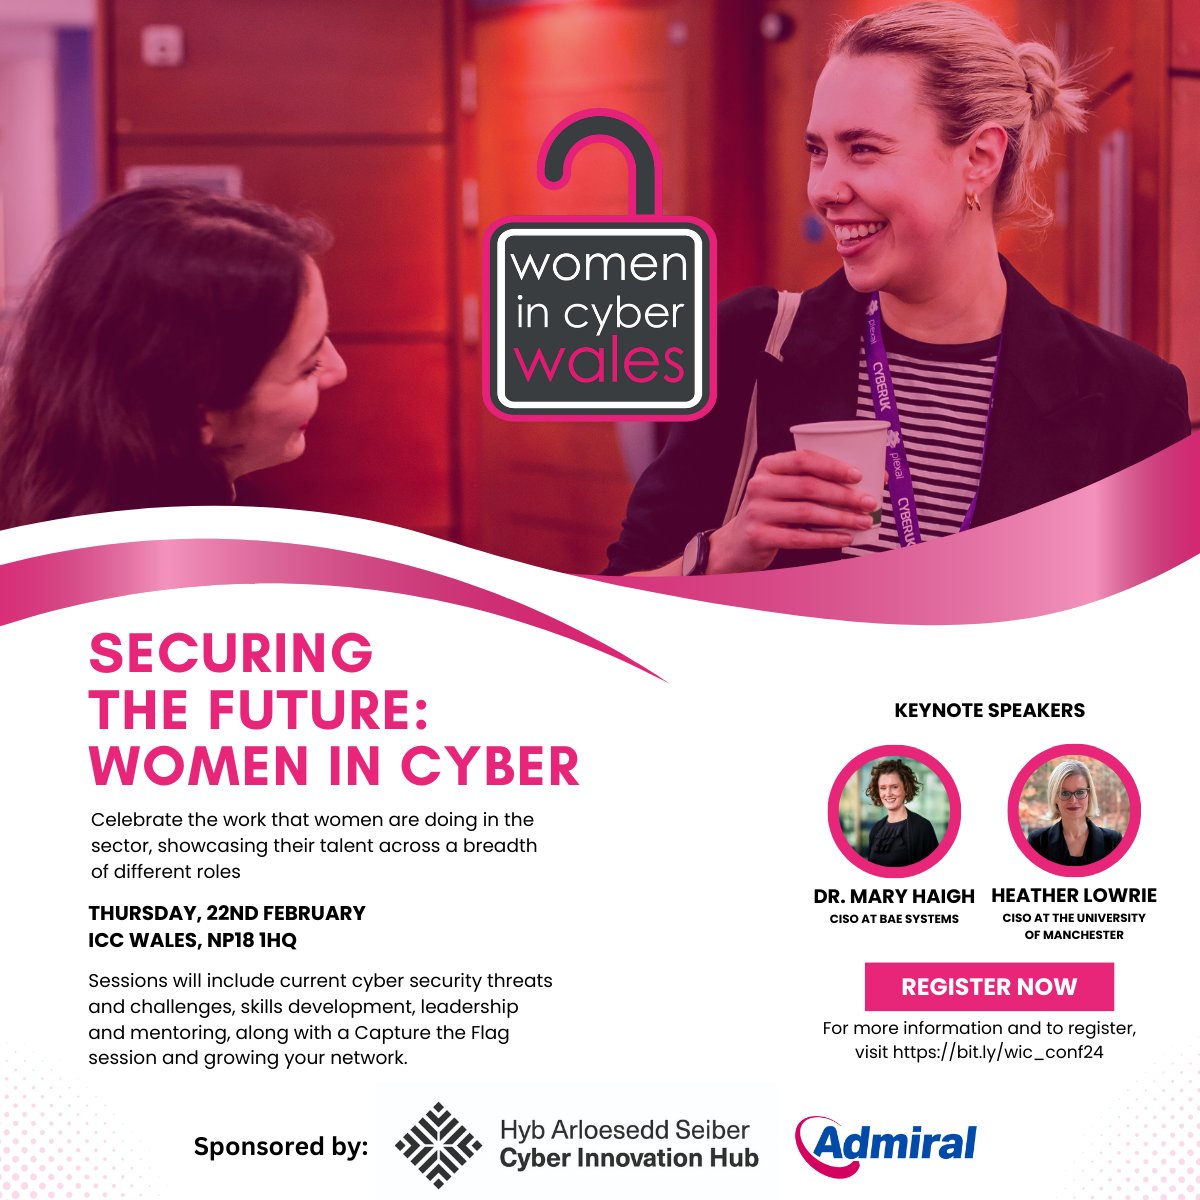 Securing the Future: #WomeninCyber - 22 February This event will celebrate the work that women are doing in the sector, showcasing their talent across a breadth of different roles and demonstrating the importance of an inclusive workforce. Find out more: eventbrite.co.uk/e/securing-the…